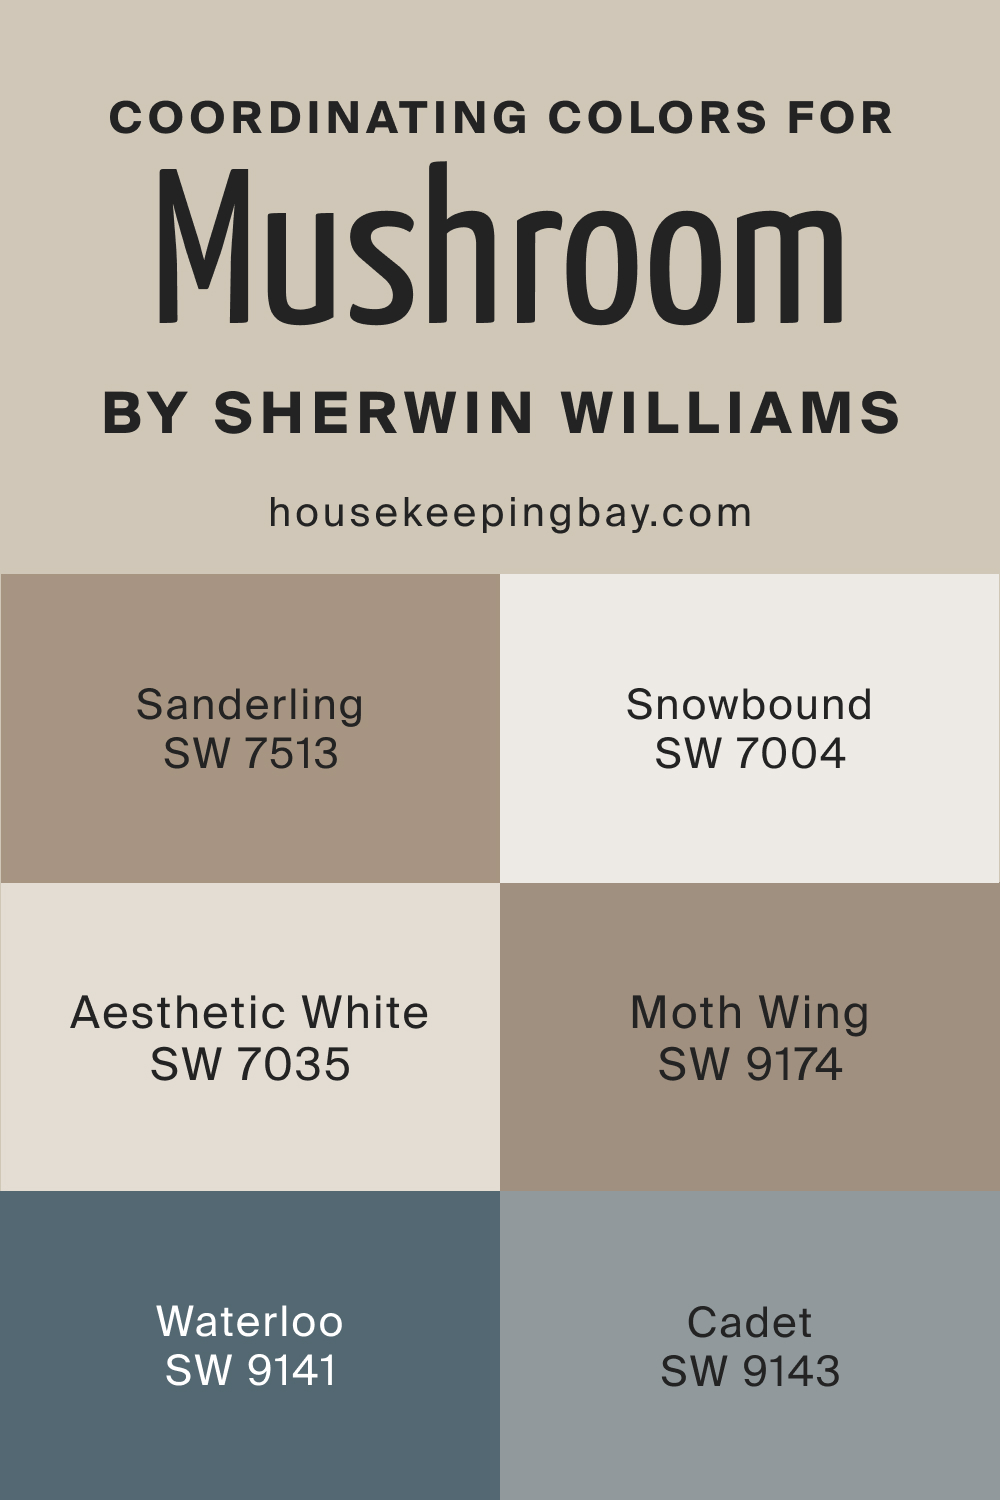 Coordinating Colors for SW Mushroom by Sherwin Williams